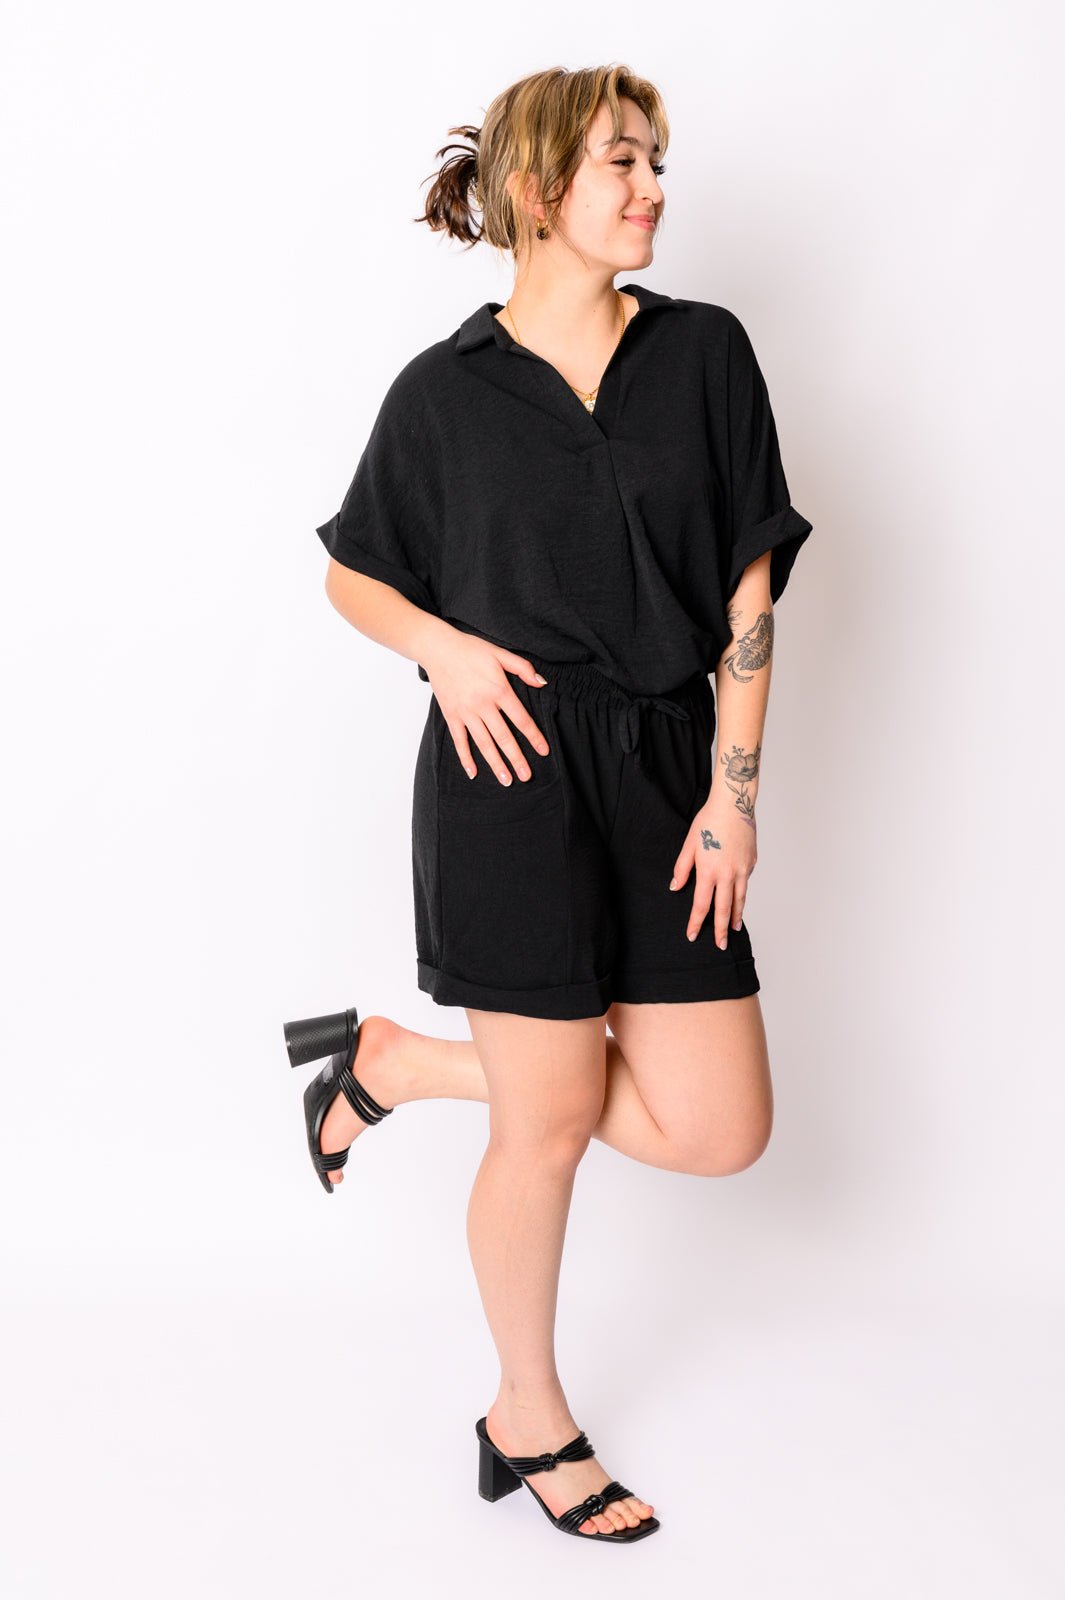 Because I Said So Dolman Sleeve Top in Black - AS8058-01 - Love it Curvy